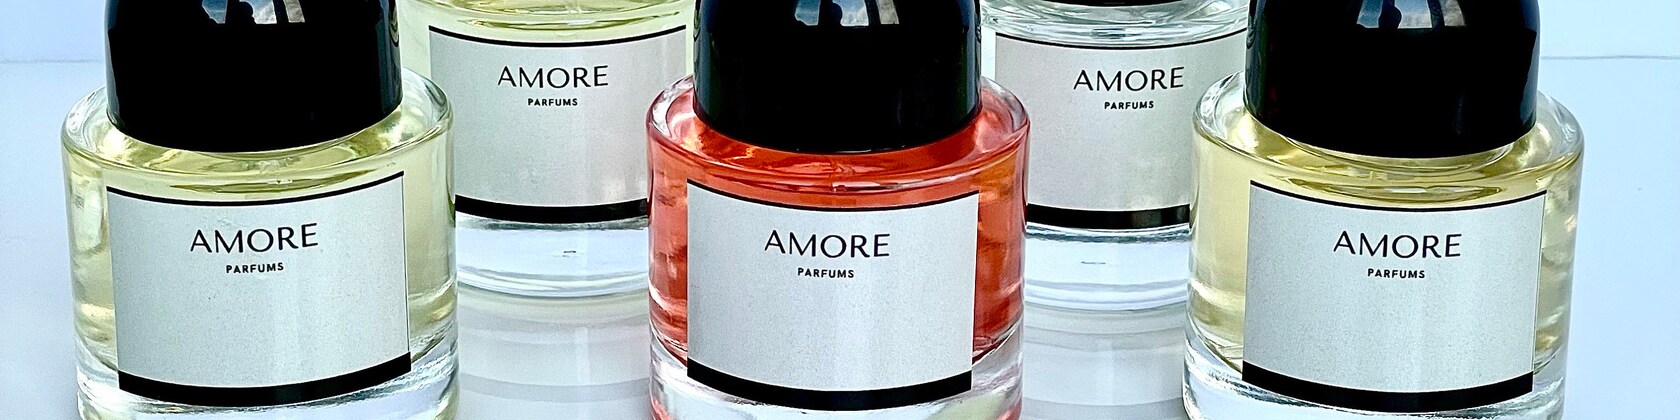 Amore Parfums HSW Inspired by Nishane Hundred Silent Ways -  Israel